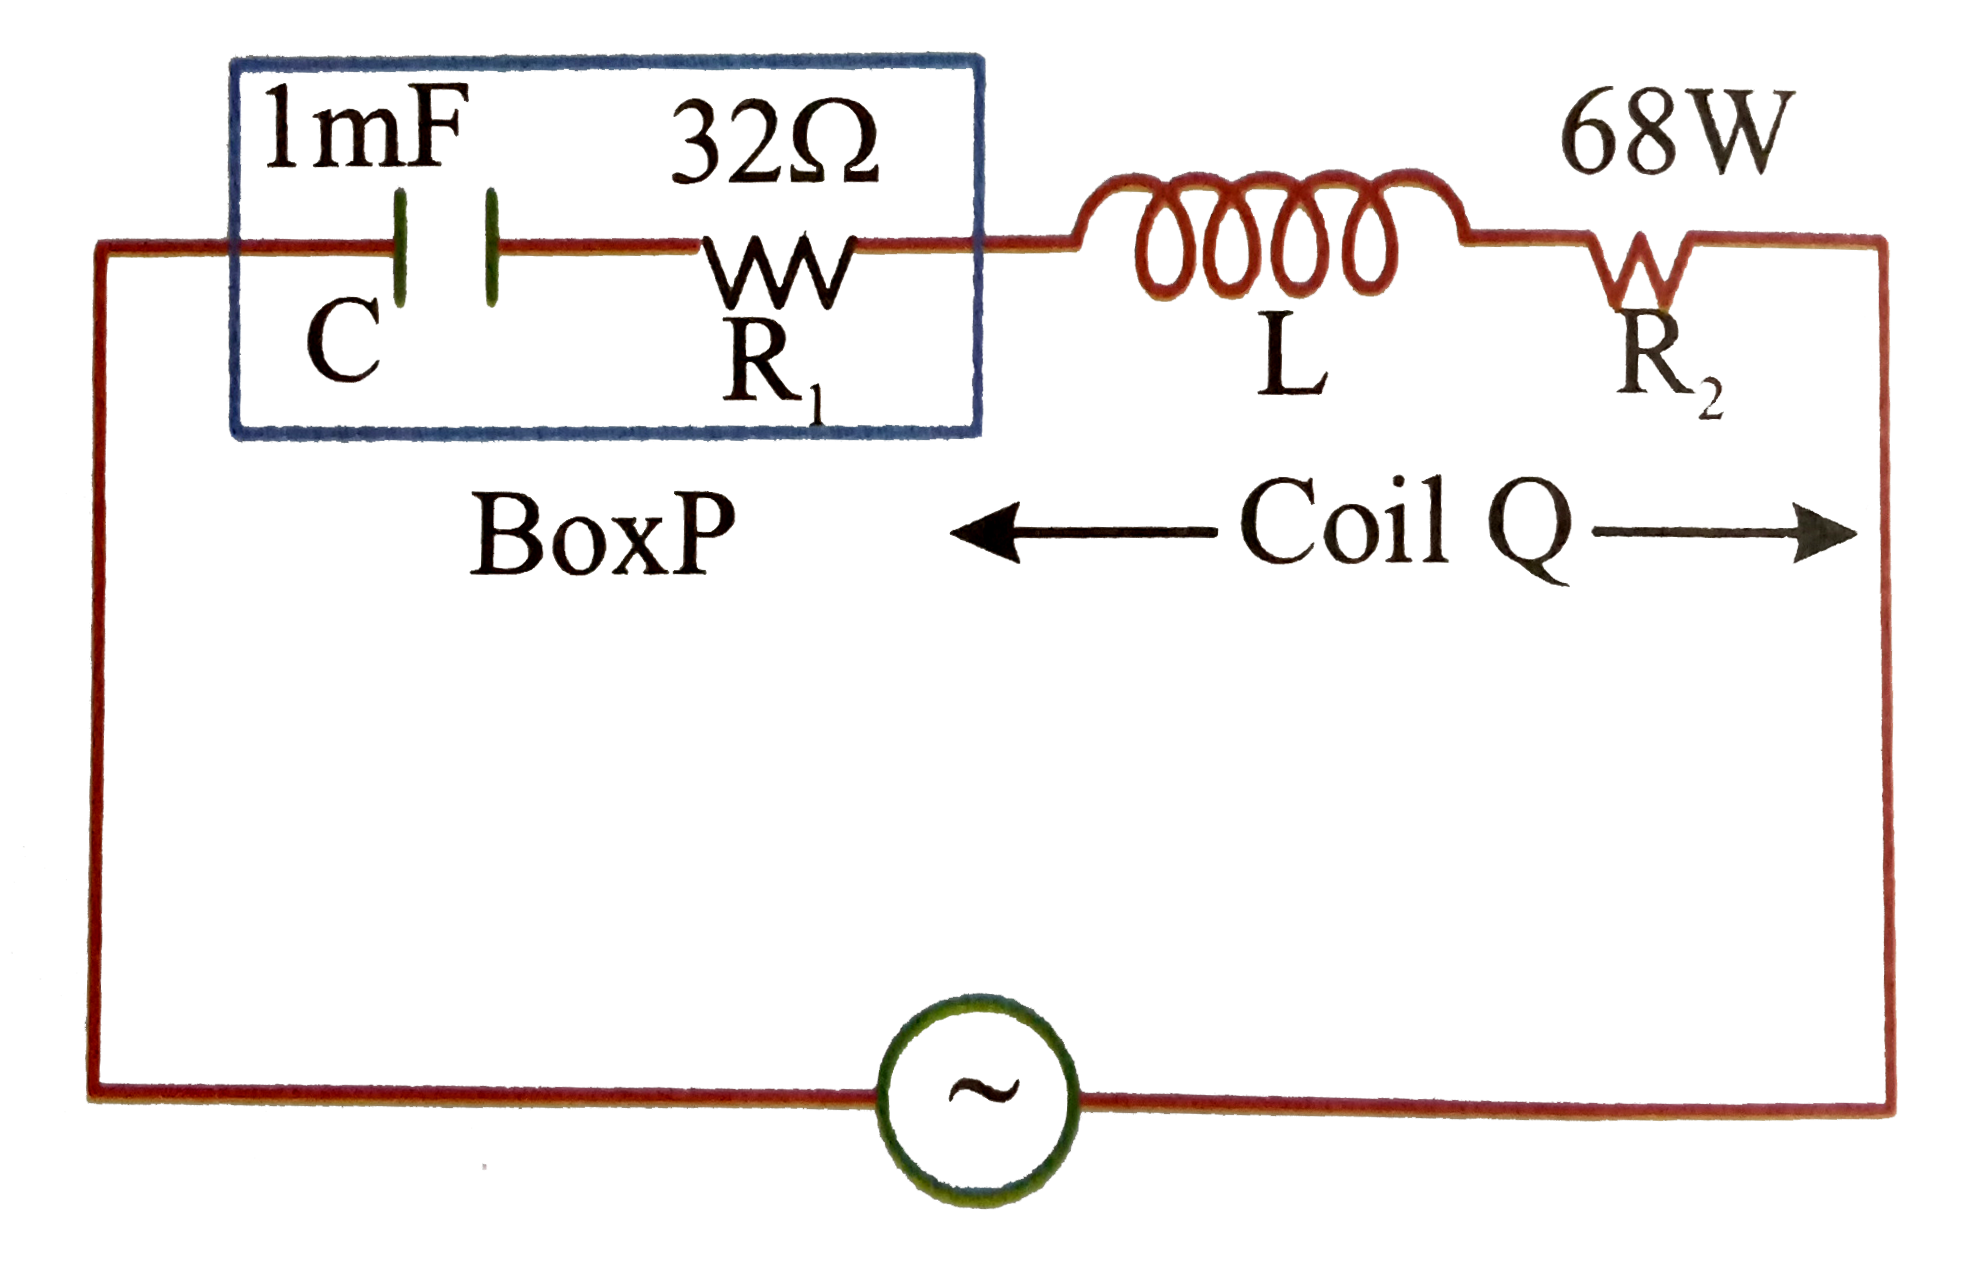 A box P and a coil Q are connected in series with an AC source of variable frequency. The emf of the source is constant at 10 V. Box P contains a capacitance of 1 mu F in series with a resistance of 32 Omega. Coil Q has a self-inductance 4.9 mH and a resistance of 68 Omega in series. The frequency is adjusted to that the maximum current flows in P and Q. At this frequency   (a) The impedance of P is 77 Omega   (b) The impedance of Q is 85 Omega   (c ) Voltage across P is 7.7 V   (d) Voltage across Q is 9.7 V